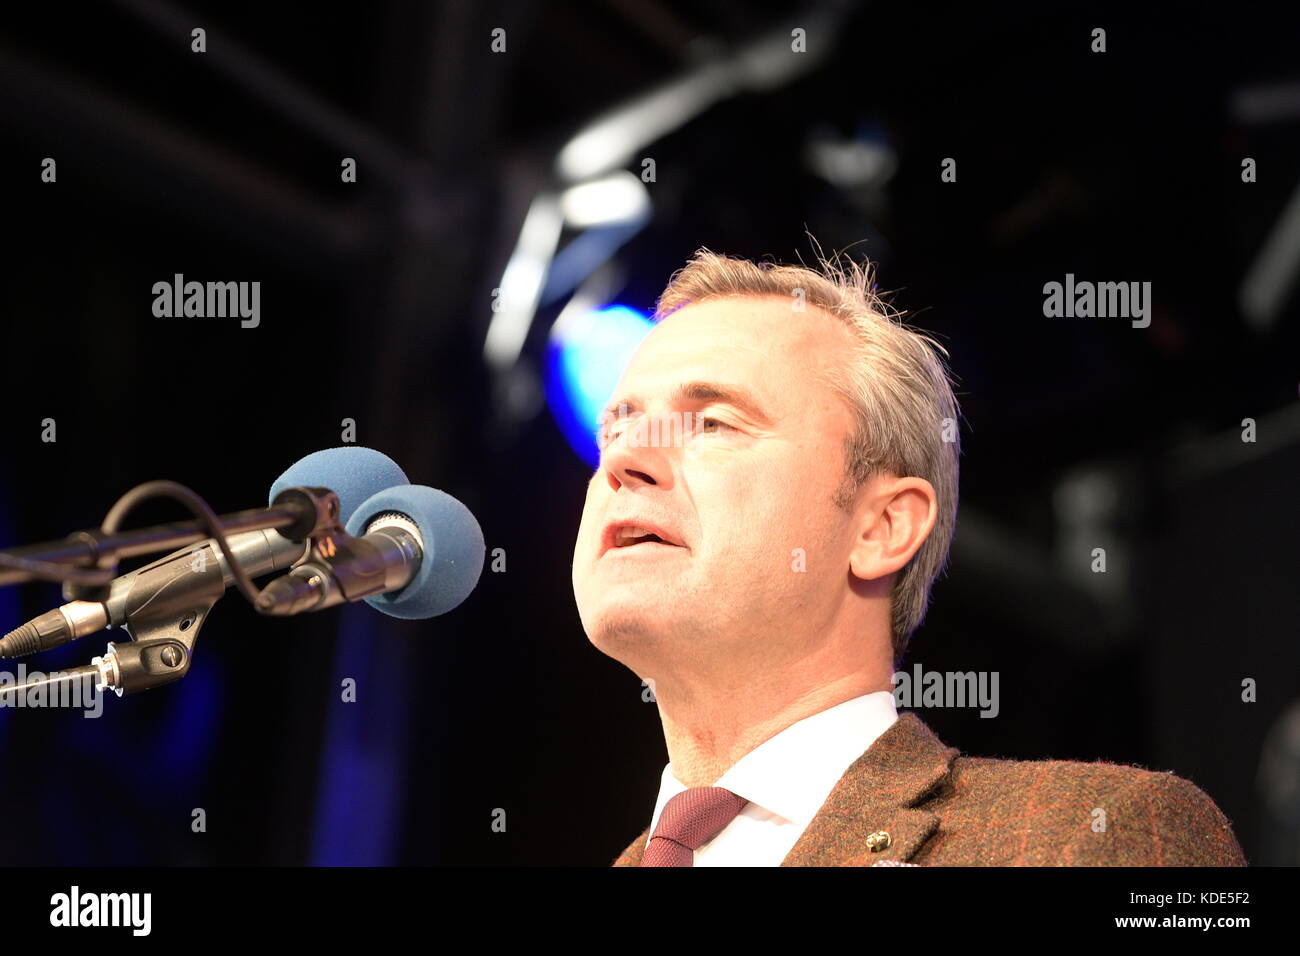 Vienna, Austria. 13th October 2017. Final of the FPÖ Fairness Tour at the Viktor Adler Market in Vienna.  The FPÖ (Freedom Party of Austria) thus concludes its election campaign to the national elections 2017. In the picture Norbert Hofer. Credit: Franz Perc / Alamy Live News Stock Photo